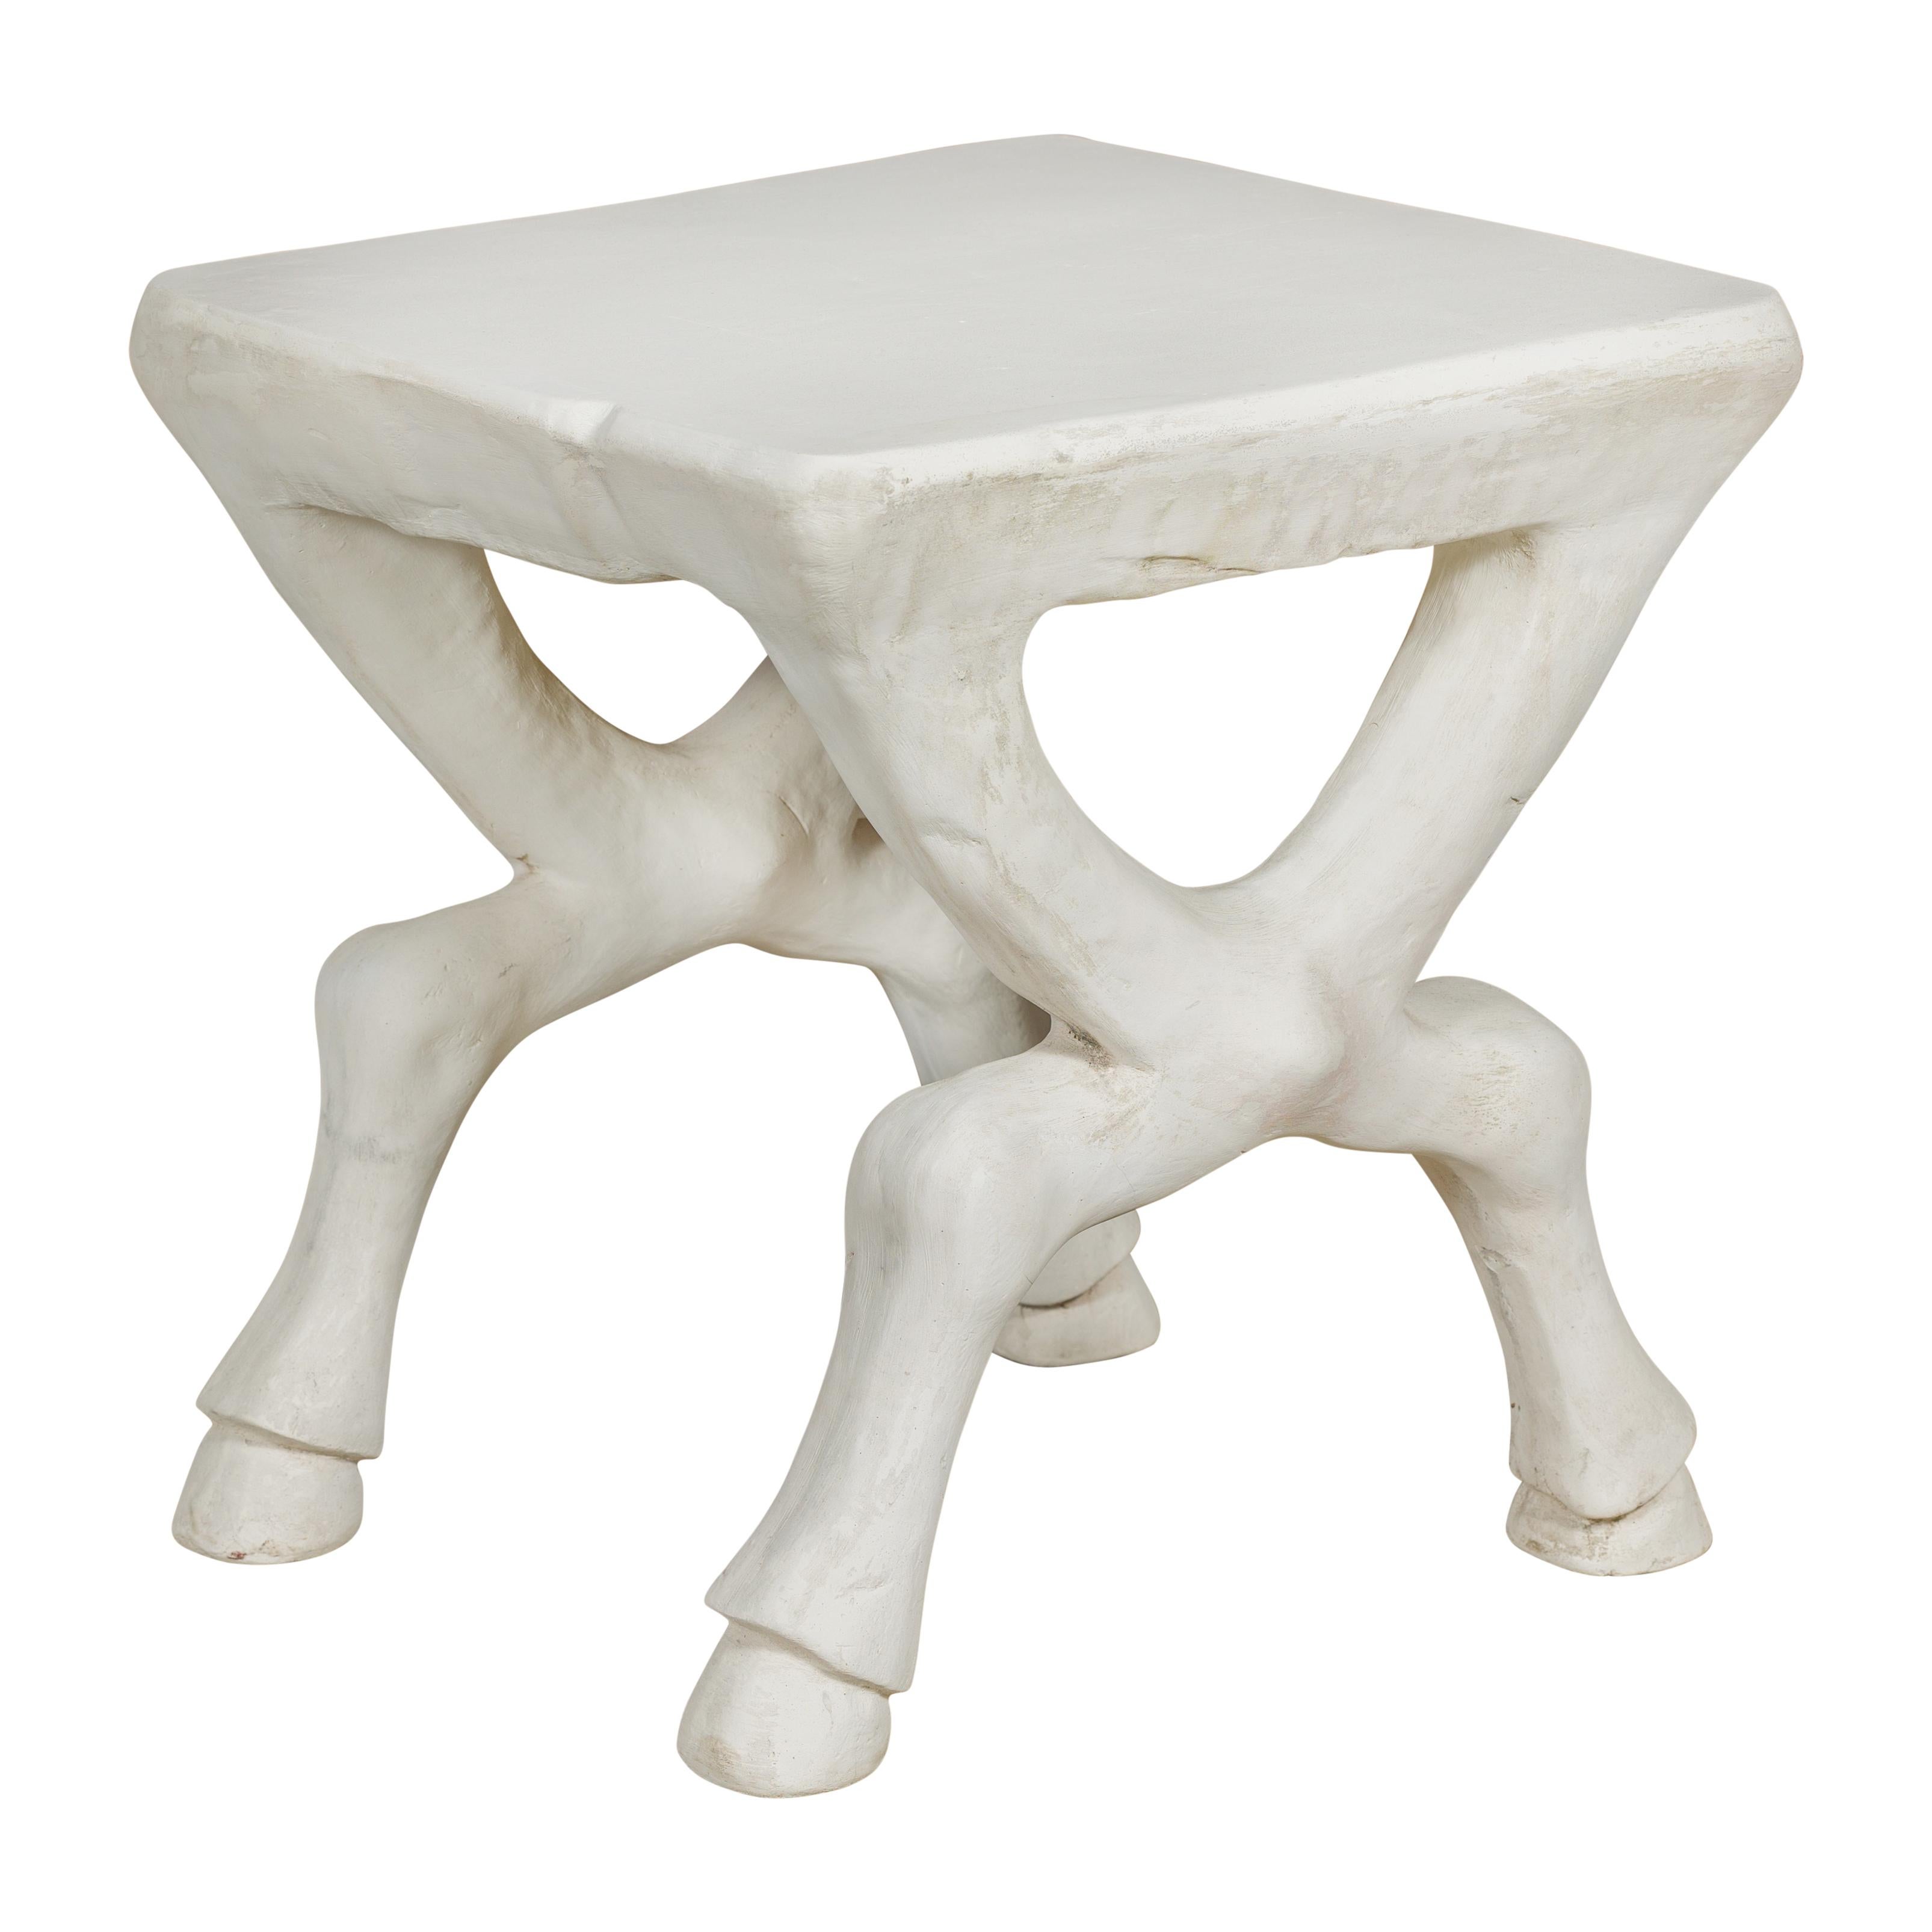 Signed John Dickinson 1970s White Plaster Low Side Table with Hoofed Feet For Sale 4